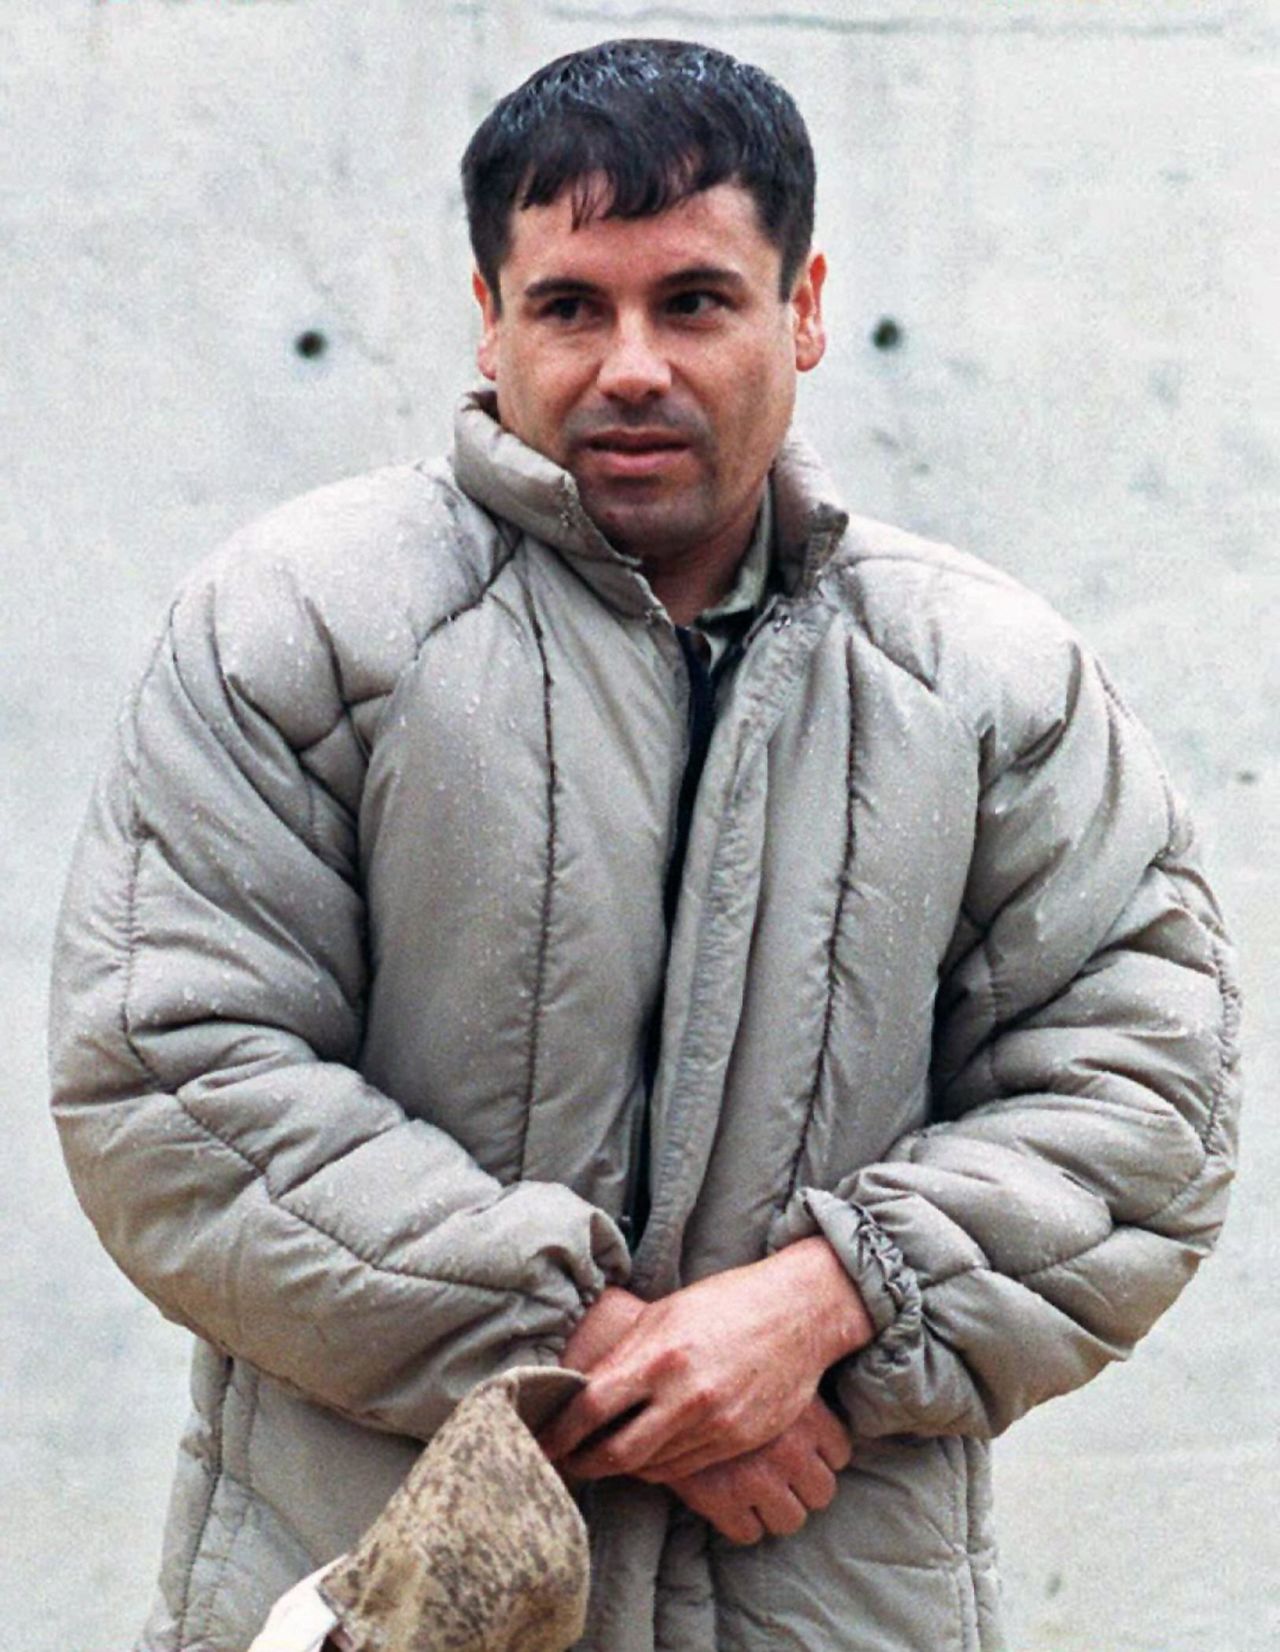 Joaquin Guzman, or "El Chapo" (Shorty), is the boss of the Sinaloa cartel. In this last-known photo taken outside a Juarez prison in 1993, the 5 foot 6 inch son of a poor family wears a schoolboy haircut and a disheveled puff-coat. He has eluded capture for more than a decade.